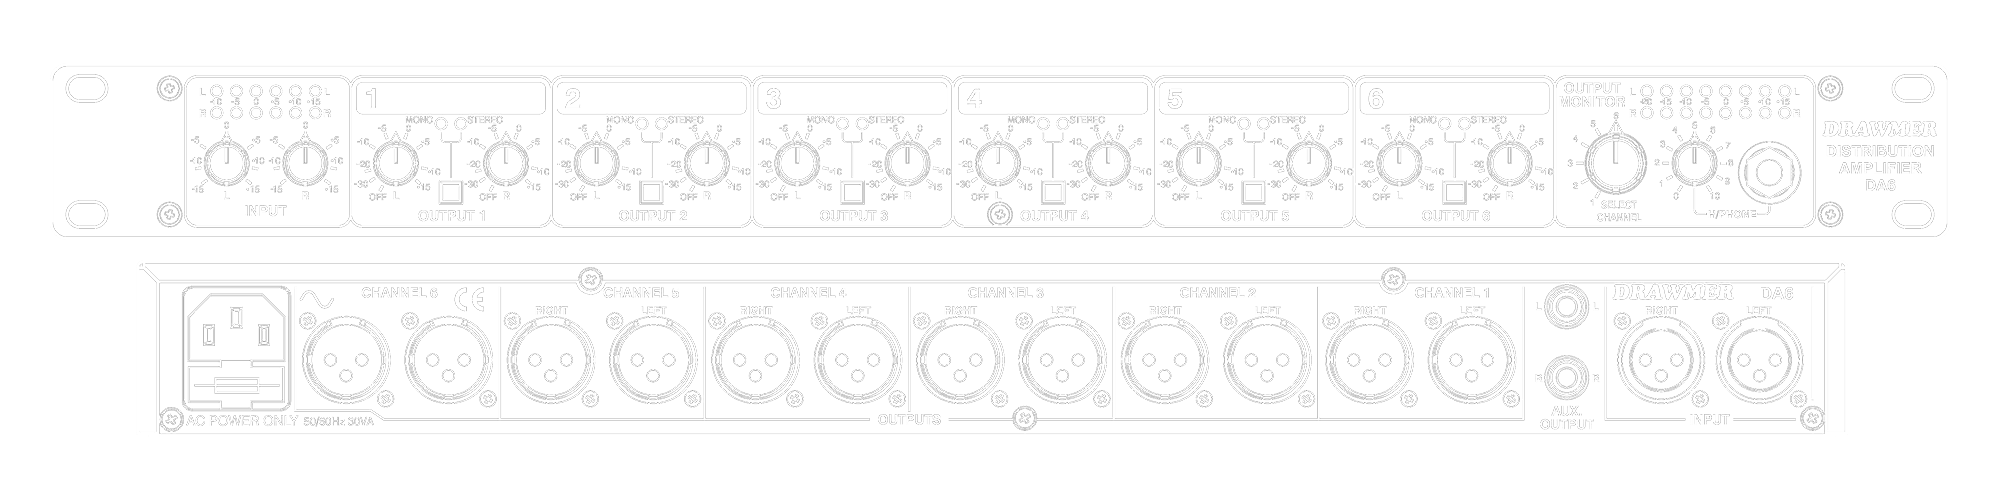 A line drawing of the front and rear panels of the DA6 showing controls and connectors